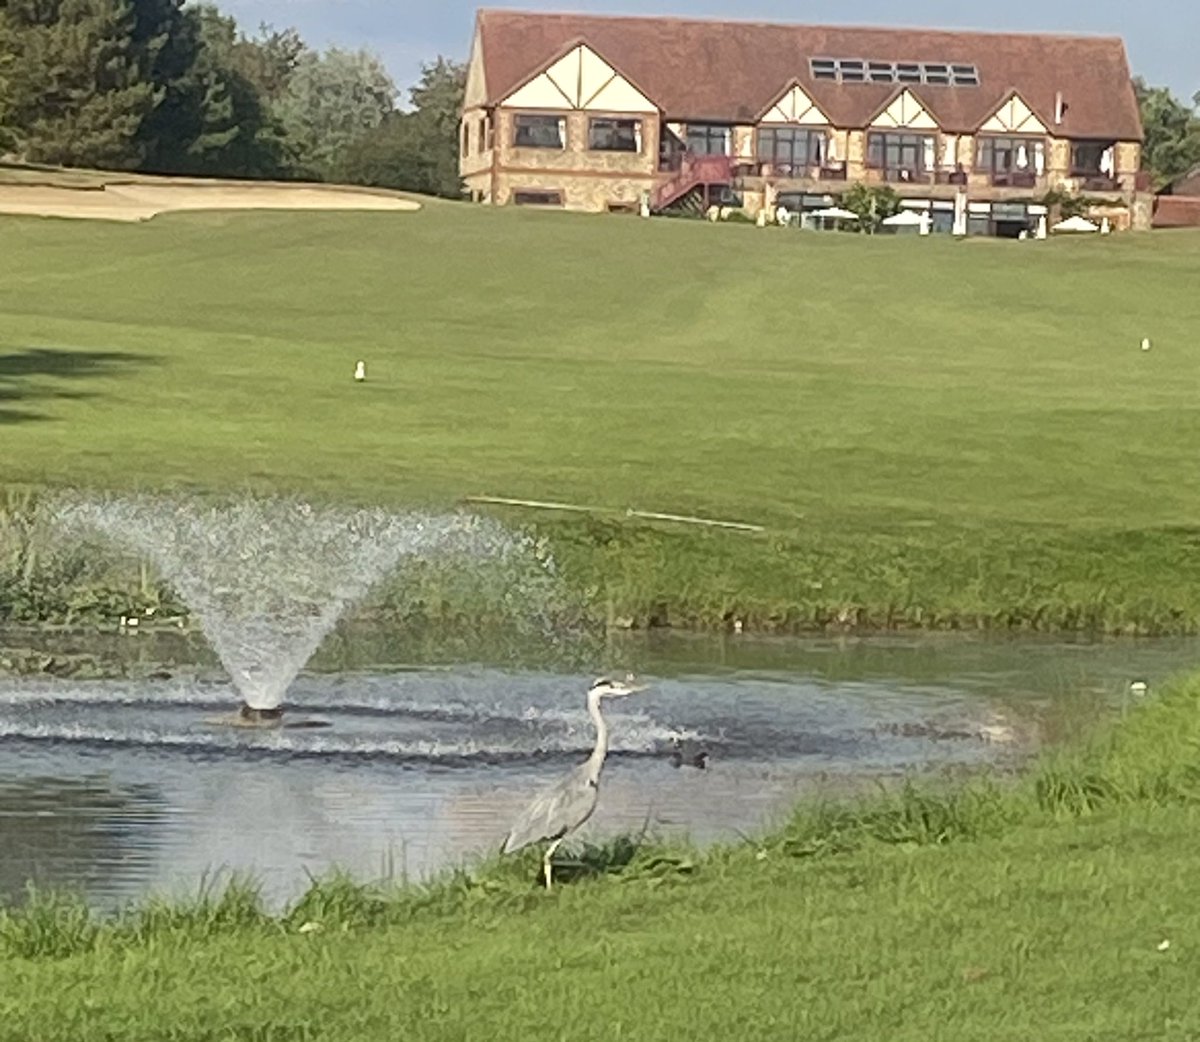 Henry the heron watching out over the wonderful 18 hole at @WragBarn golf club.